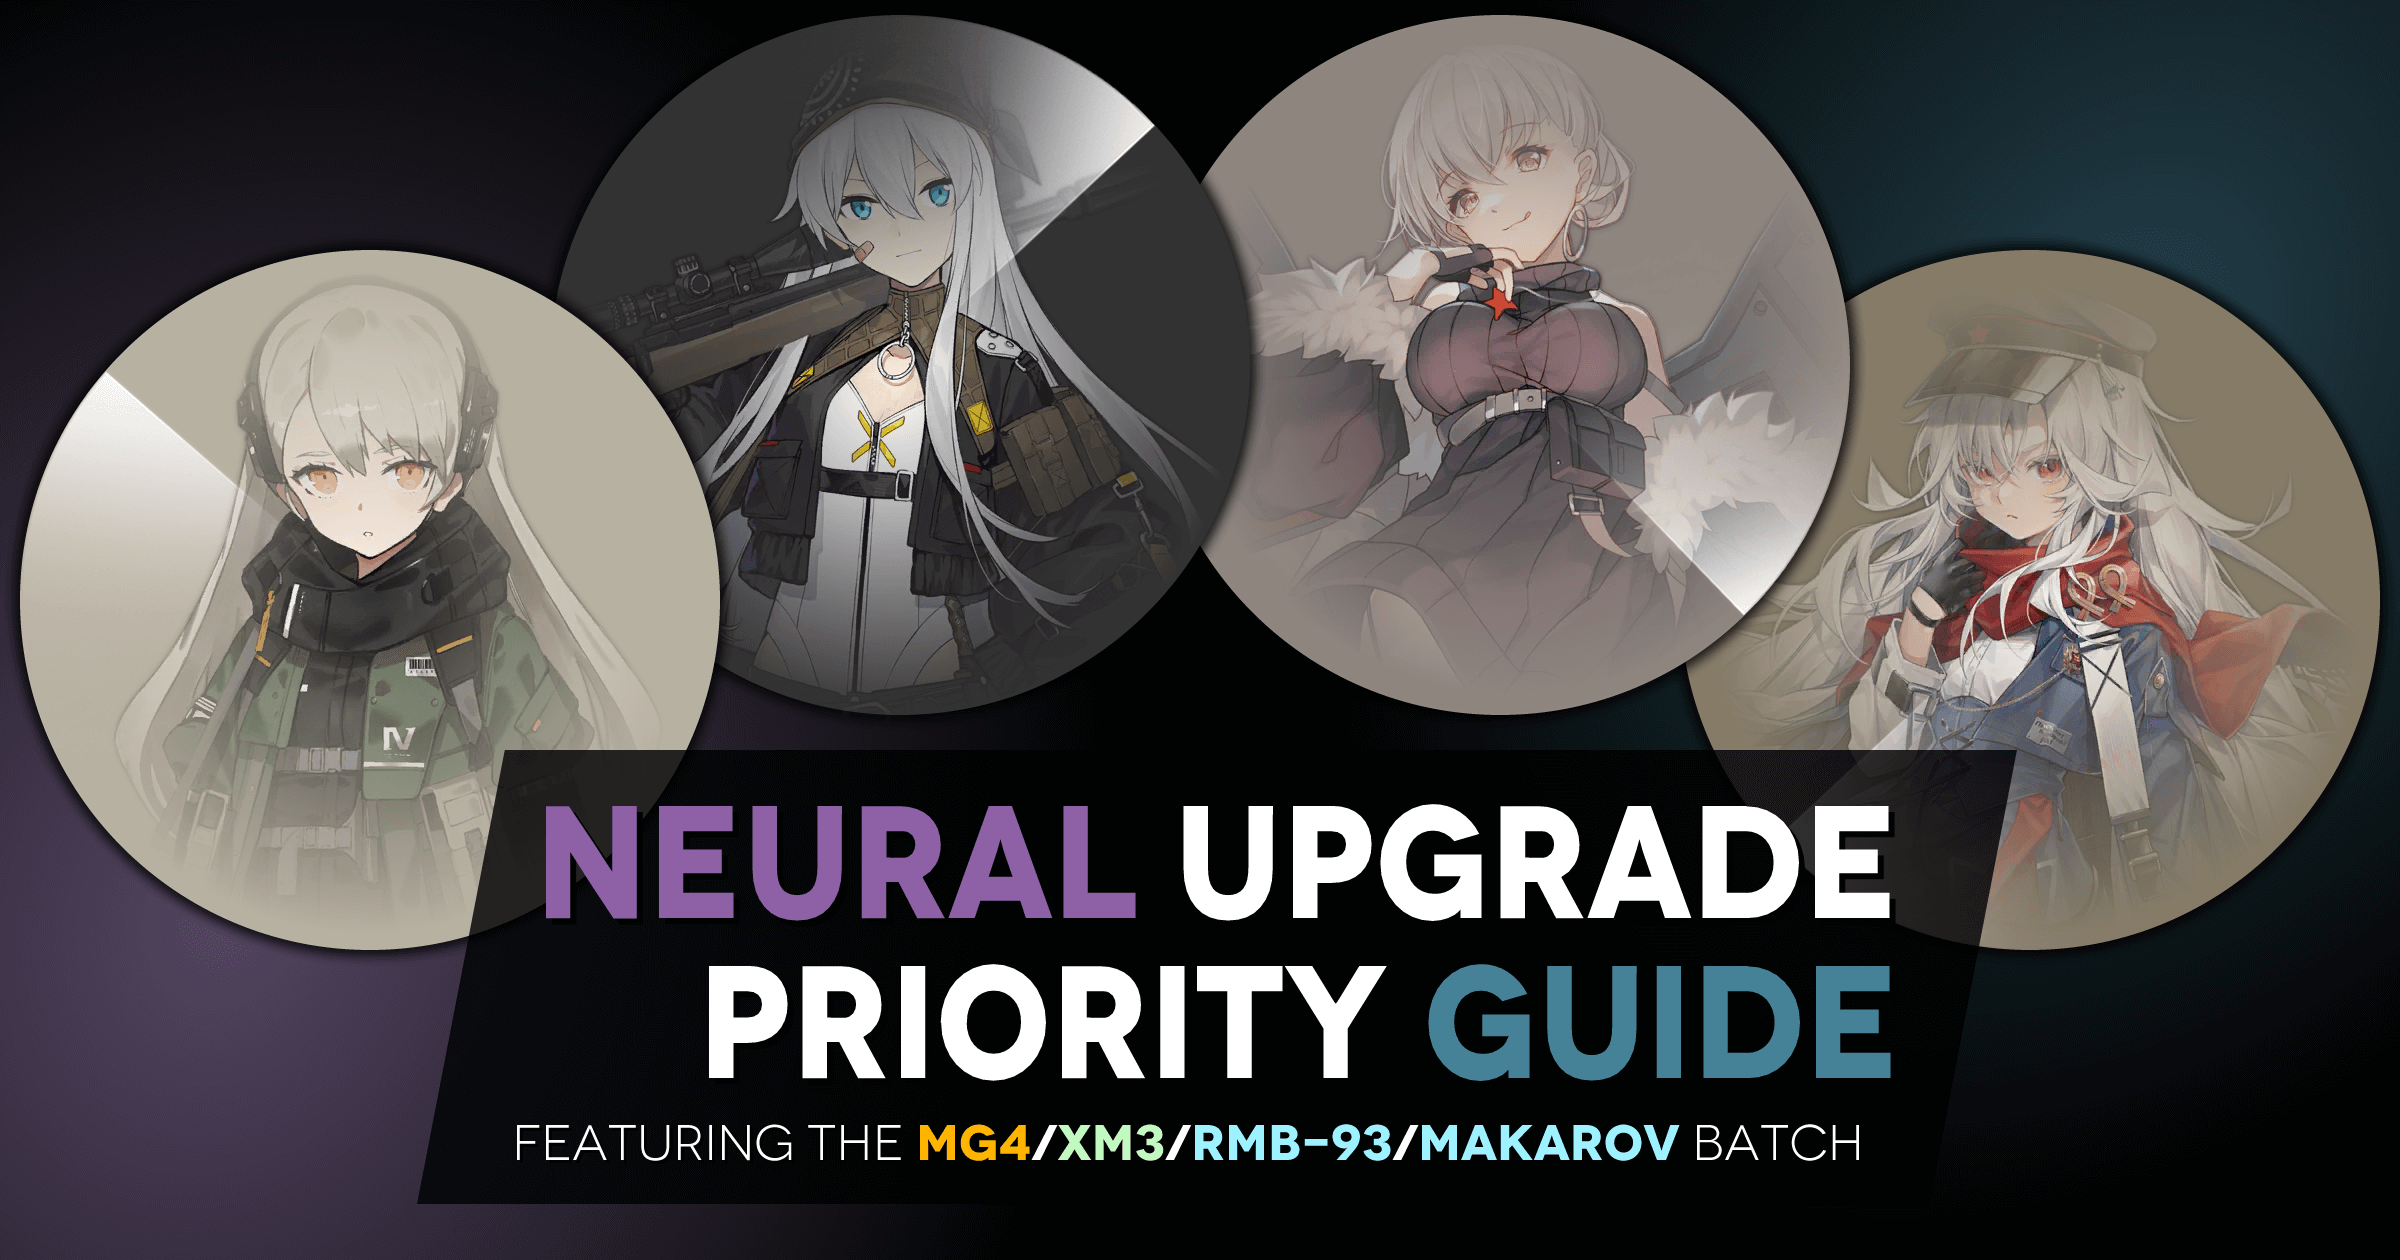 Neural Upgrade Priority Guide featuring the Poincaré Recurrence upgrades!